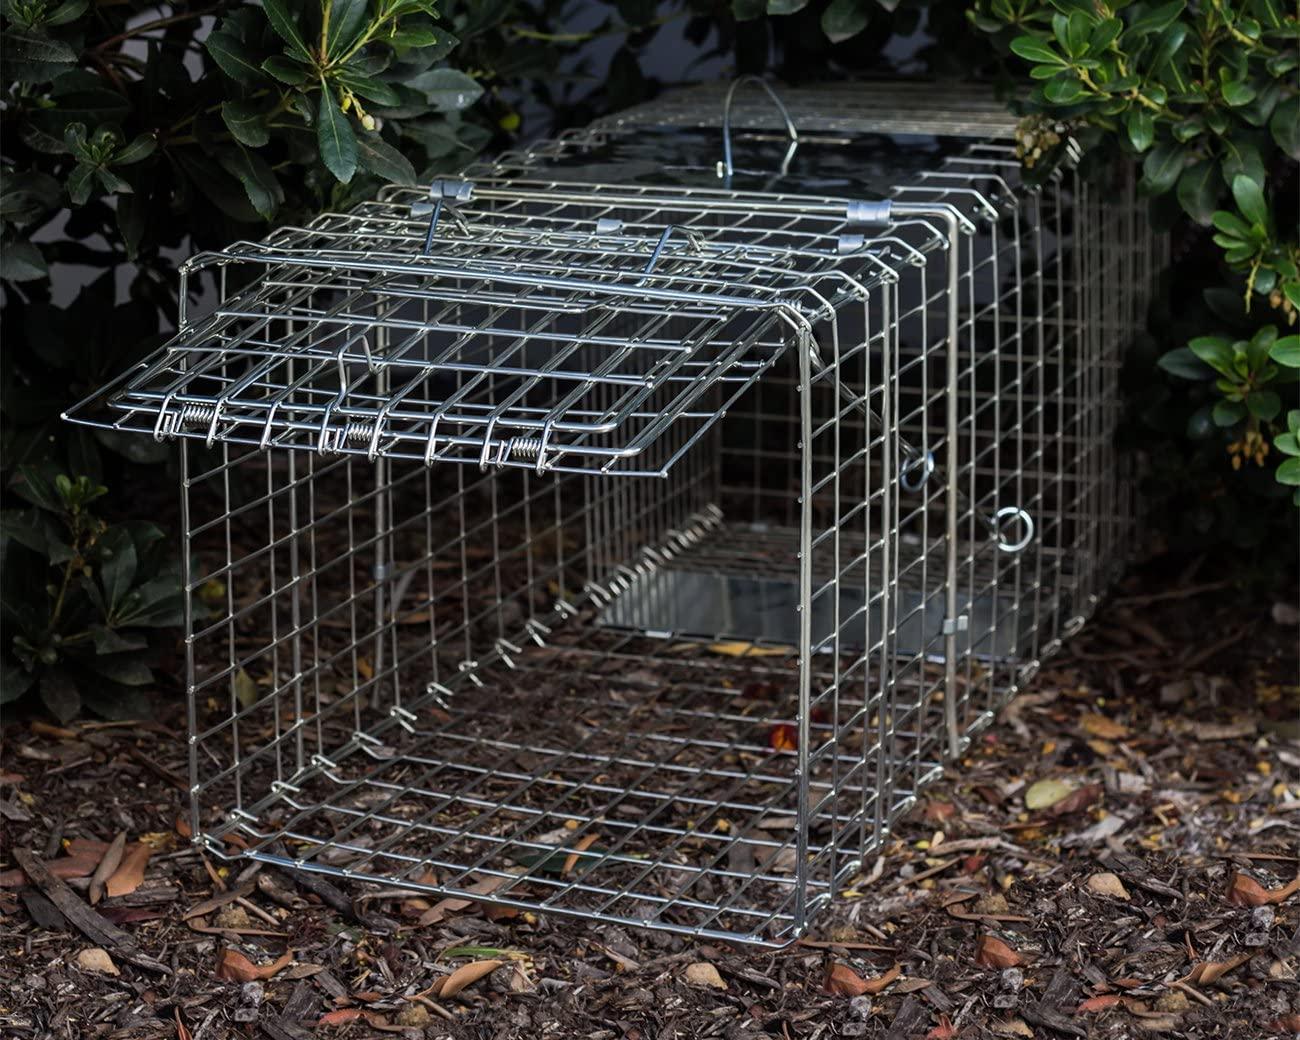 OxGord Live Animal Trap - Humane Catch & Release Large 32 Cage Best for  Raccoon, O-possum, Stray Feral Cat, Rabbit & Rodents - No-Kill Bait Trapping  Kit - Heavy Duty, 2-Door, Foldable